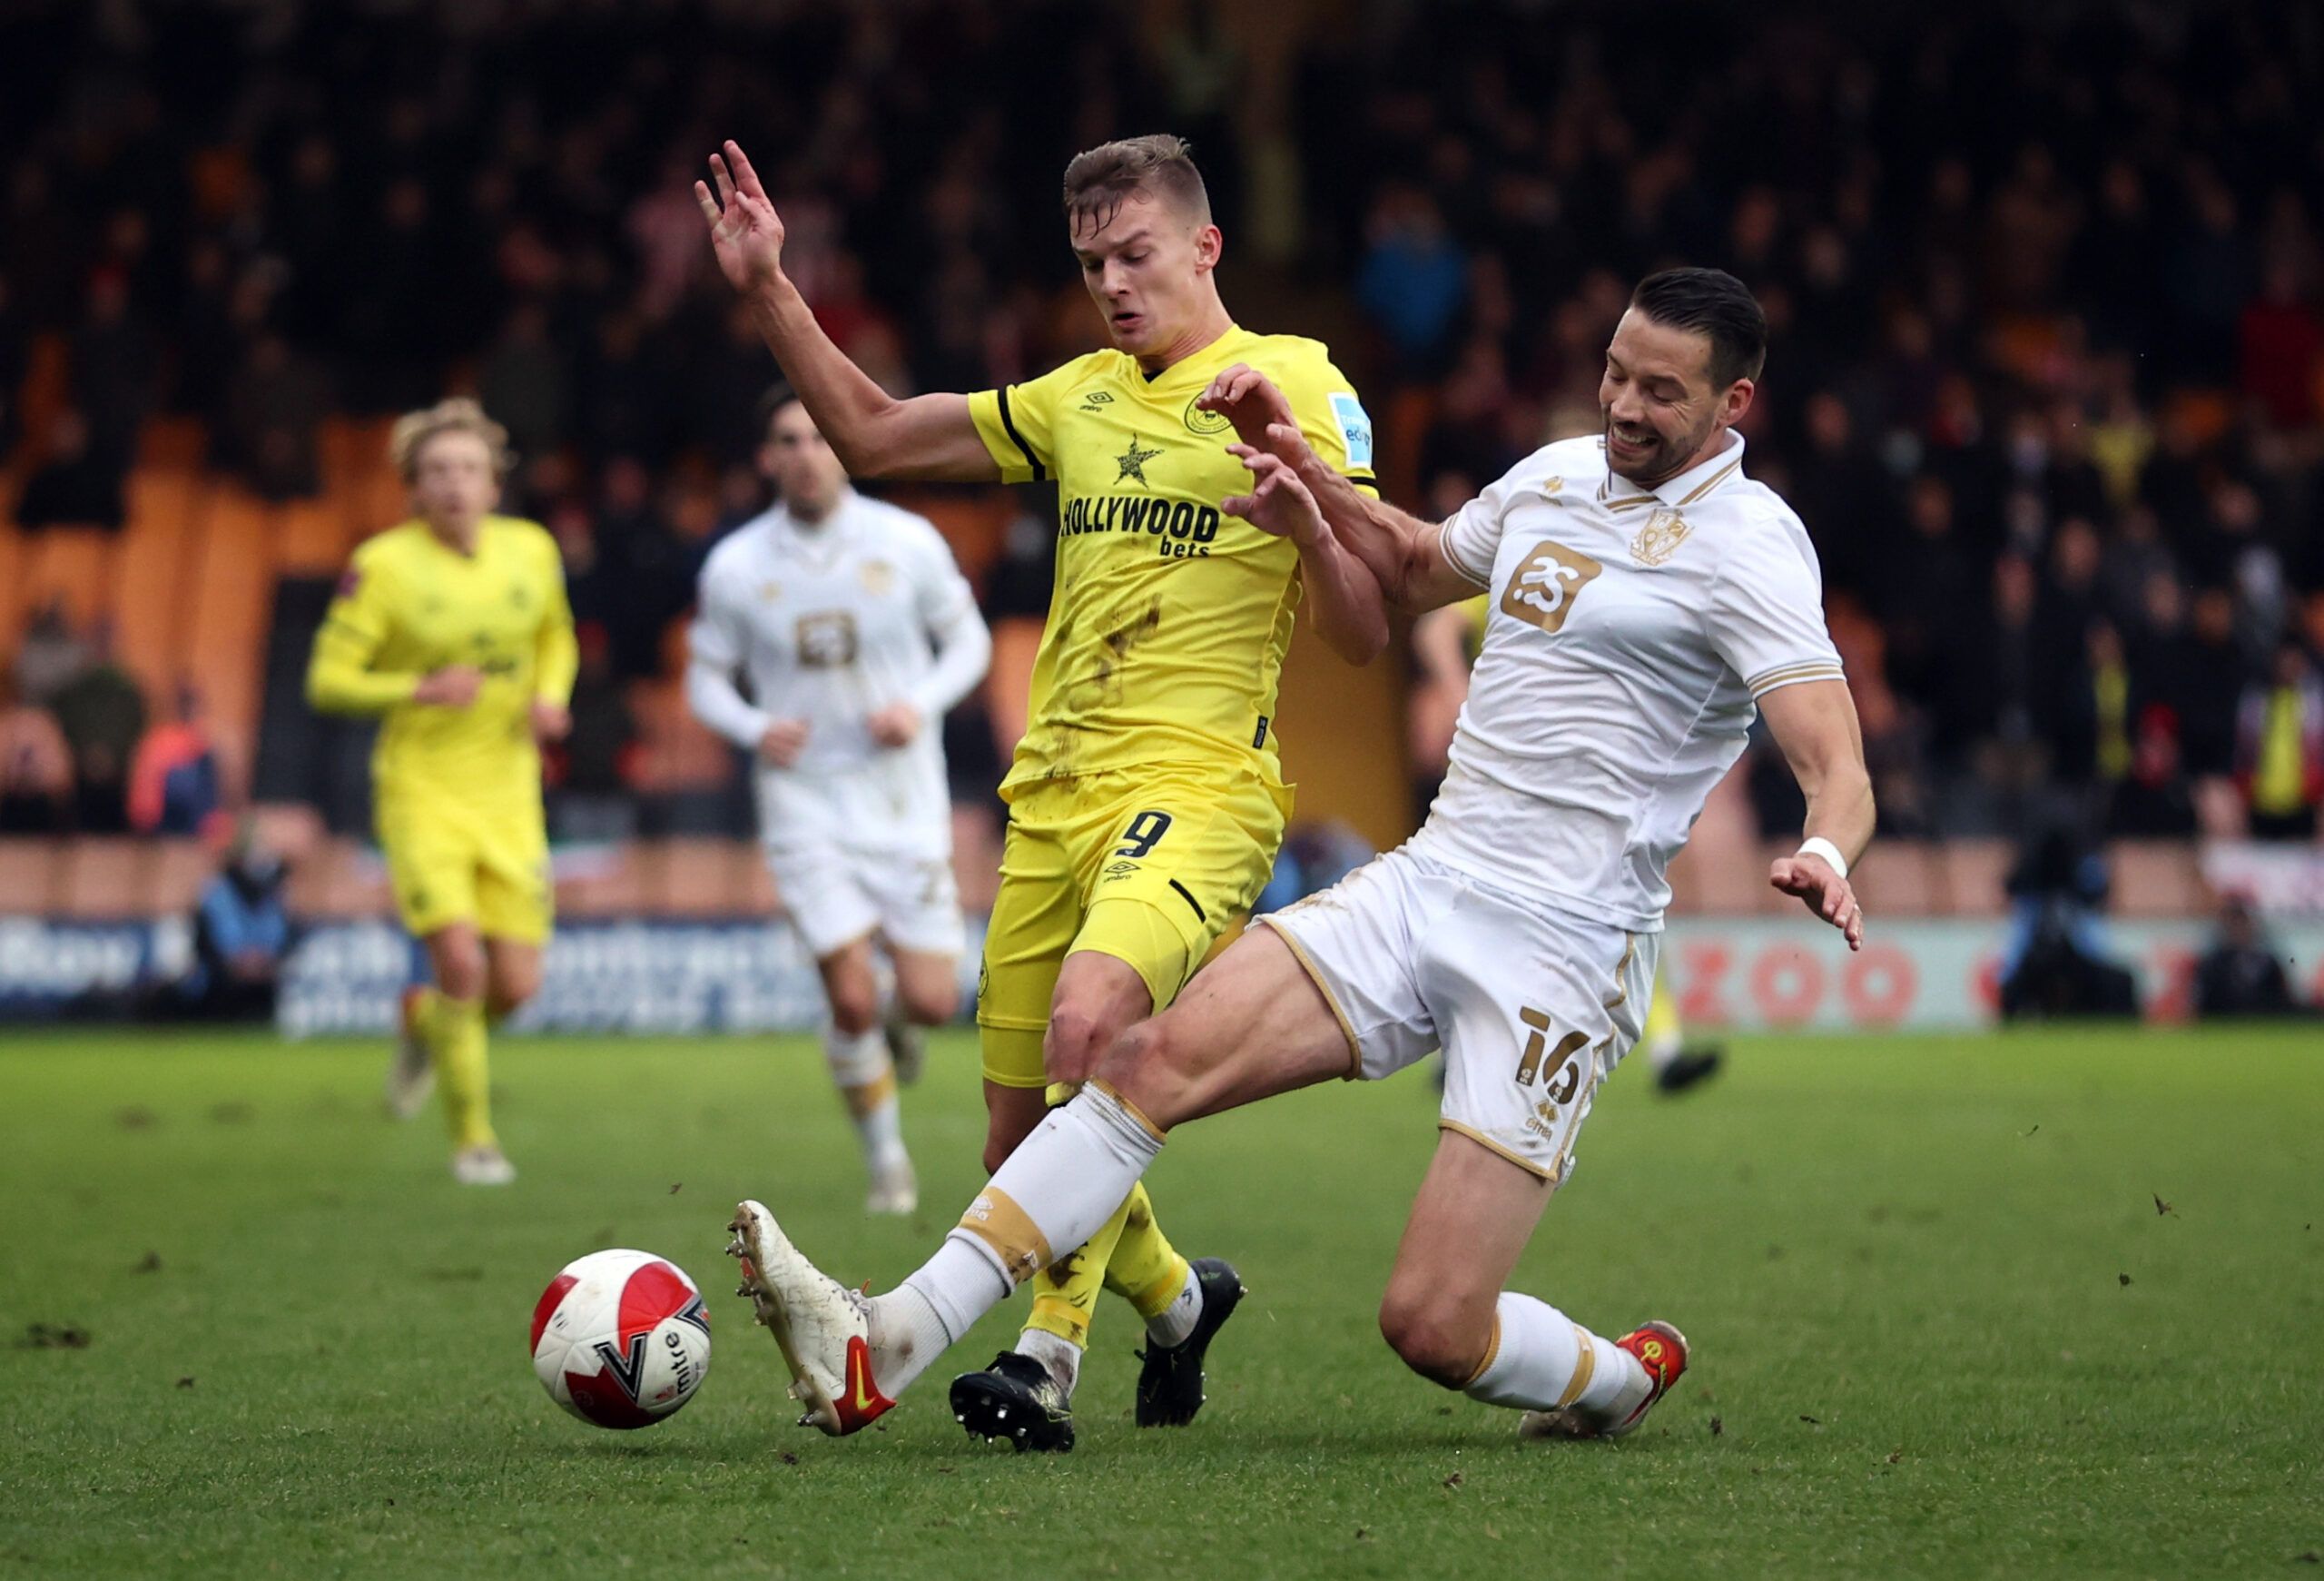 Soccer Football - FA Cup Third Round - Port Vale v Brentford - Vale Park, Stoke-on-Trent, Britain - January 8, 2022  Brentford's Marcus Forss in action with Port Vale's Aaron Martin Action Images via Reuters/Molly Darlington